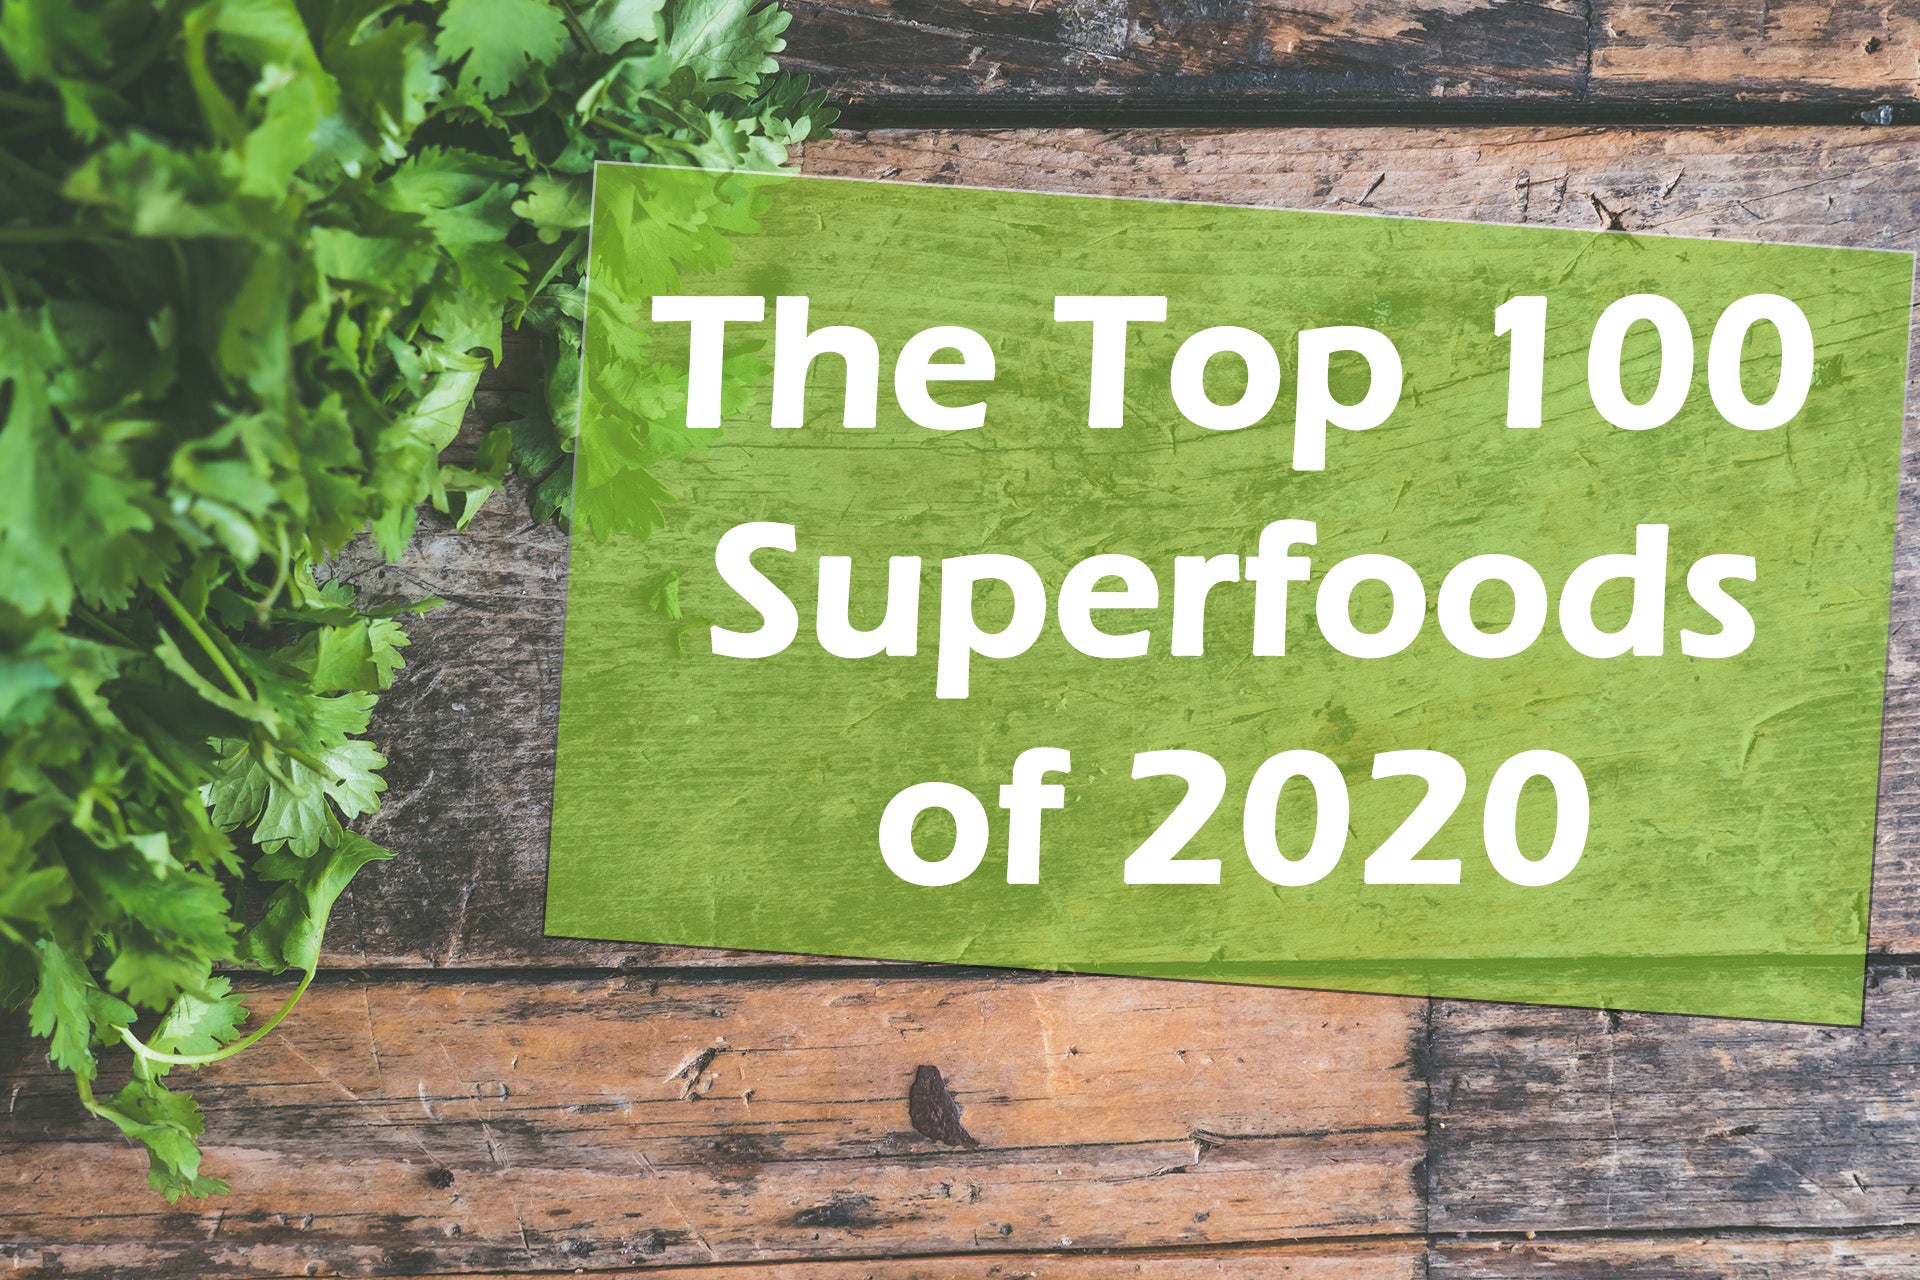 The Top 100 Superfoods of 2020